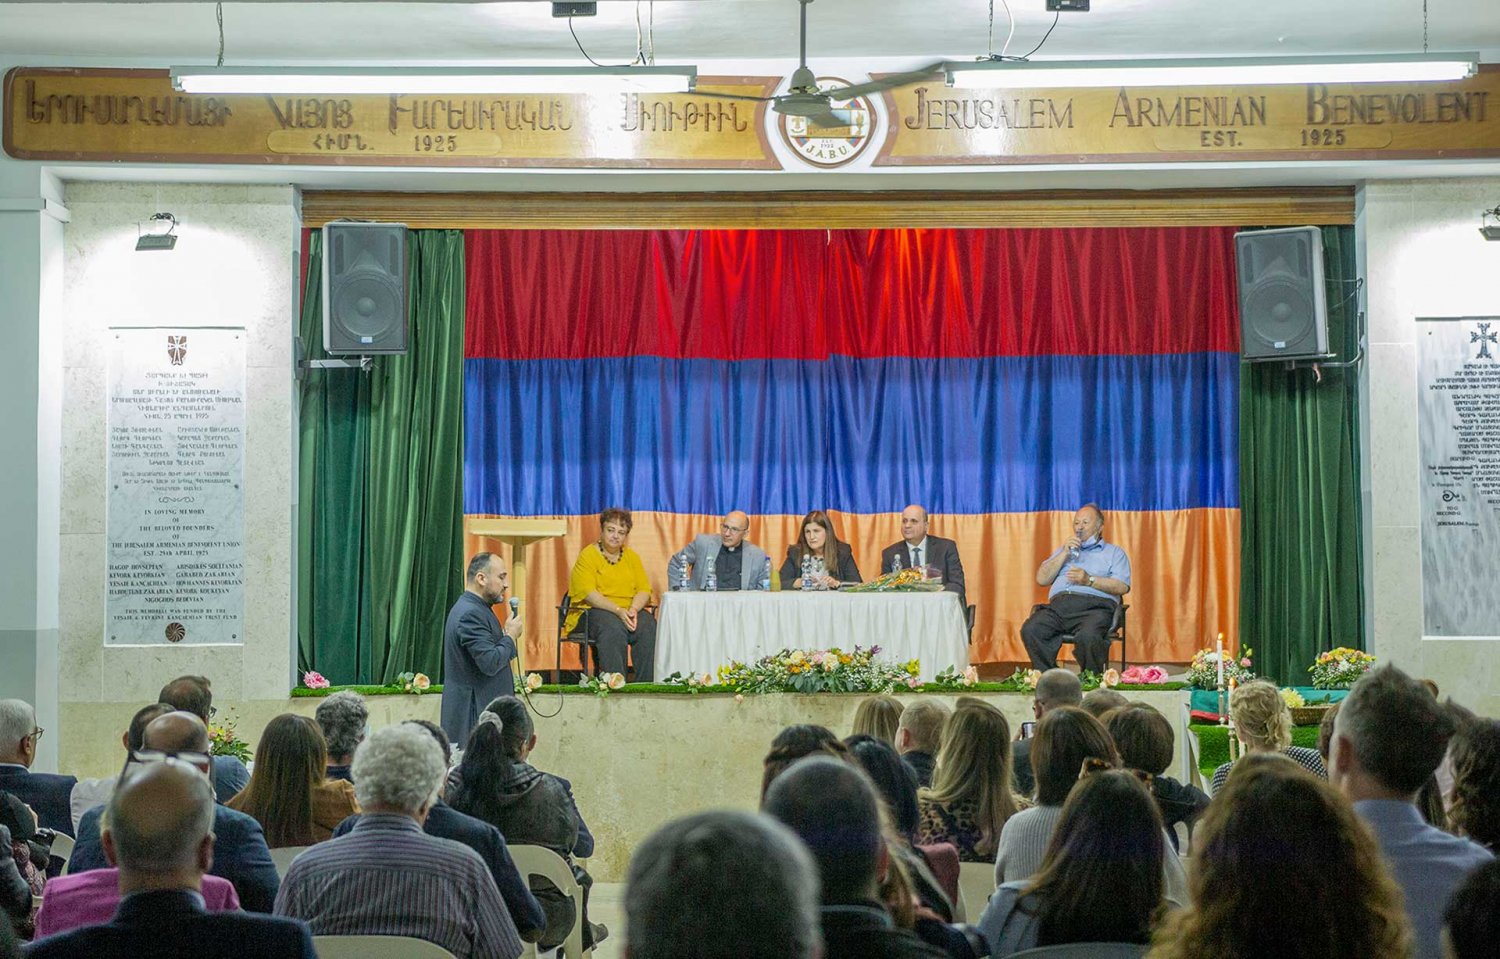 Panel of Armenian experts discusses new history of Armenians in Jerusalem and Palestine, in the Old City